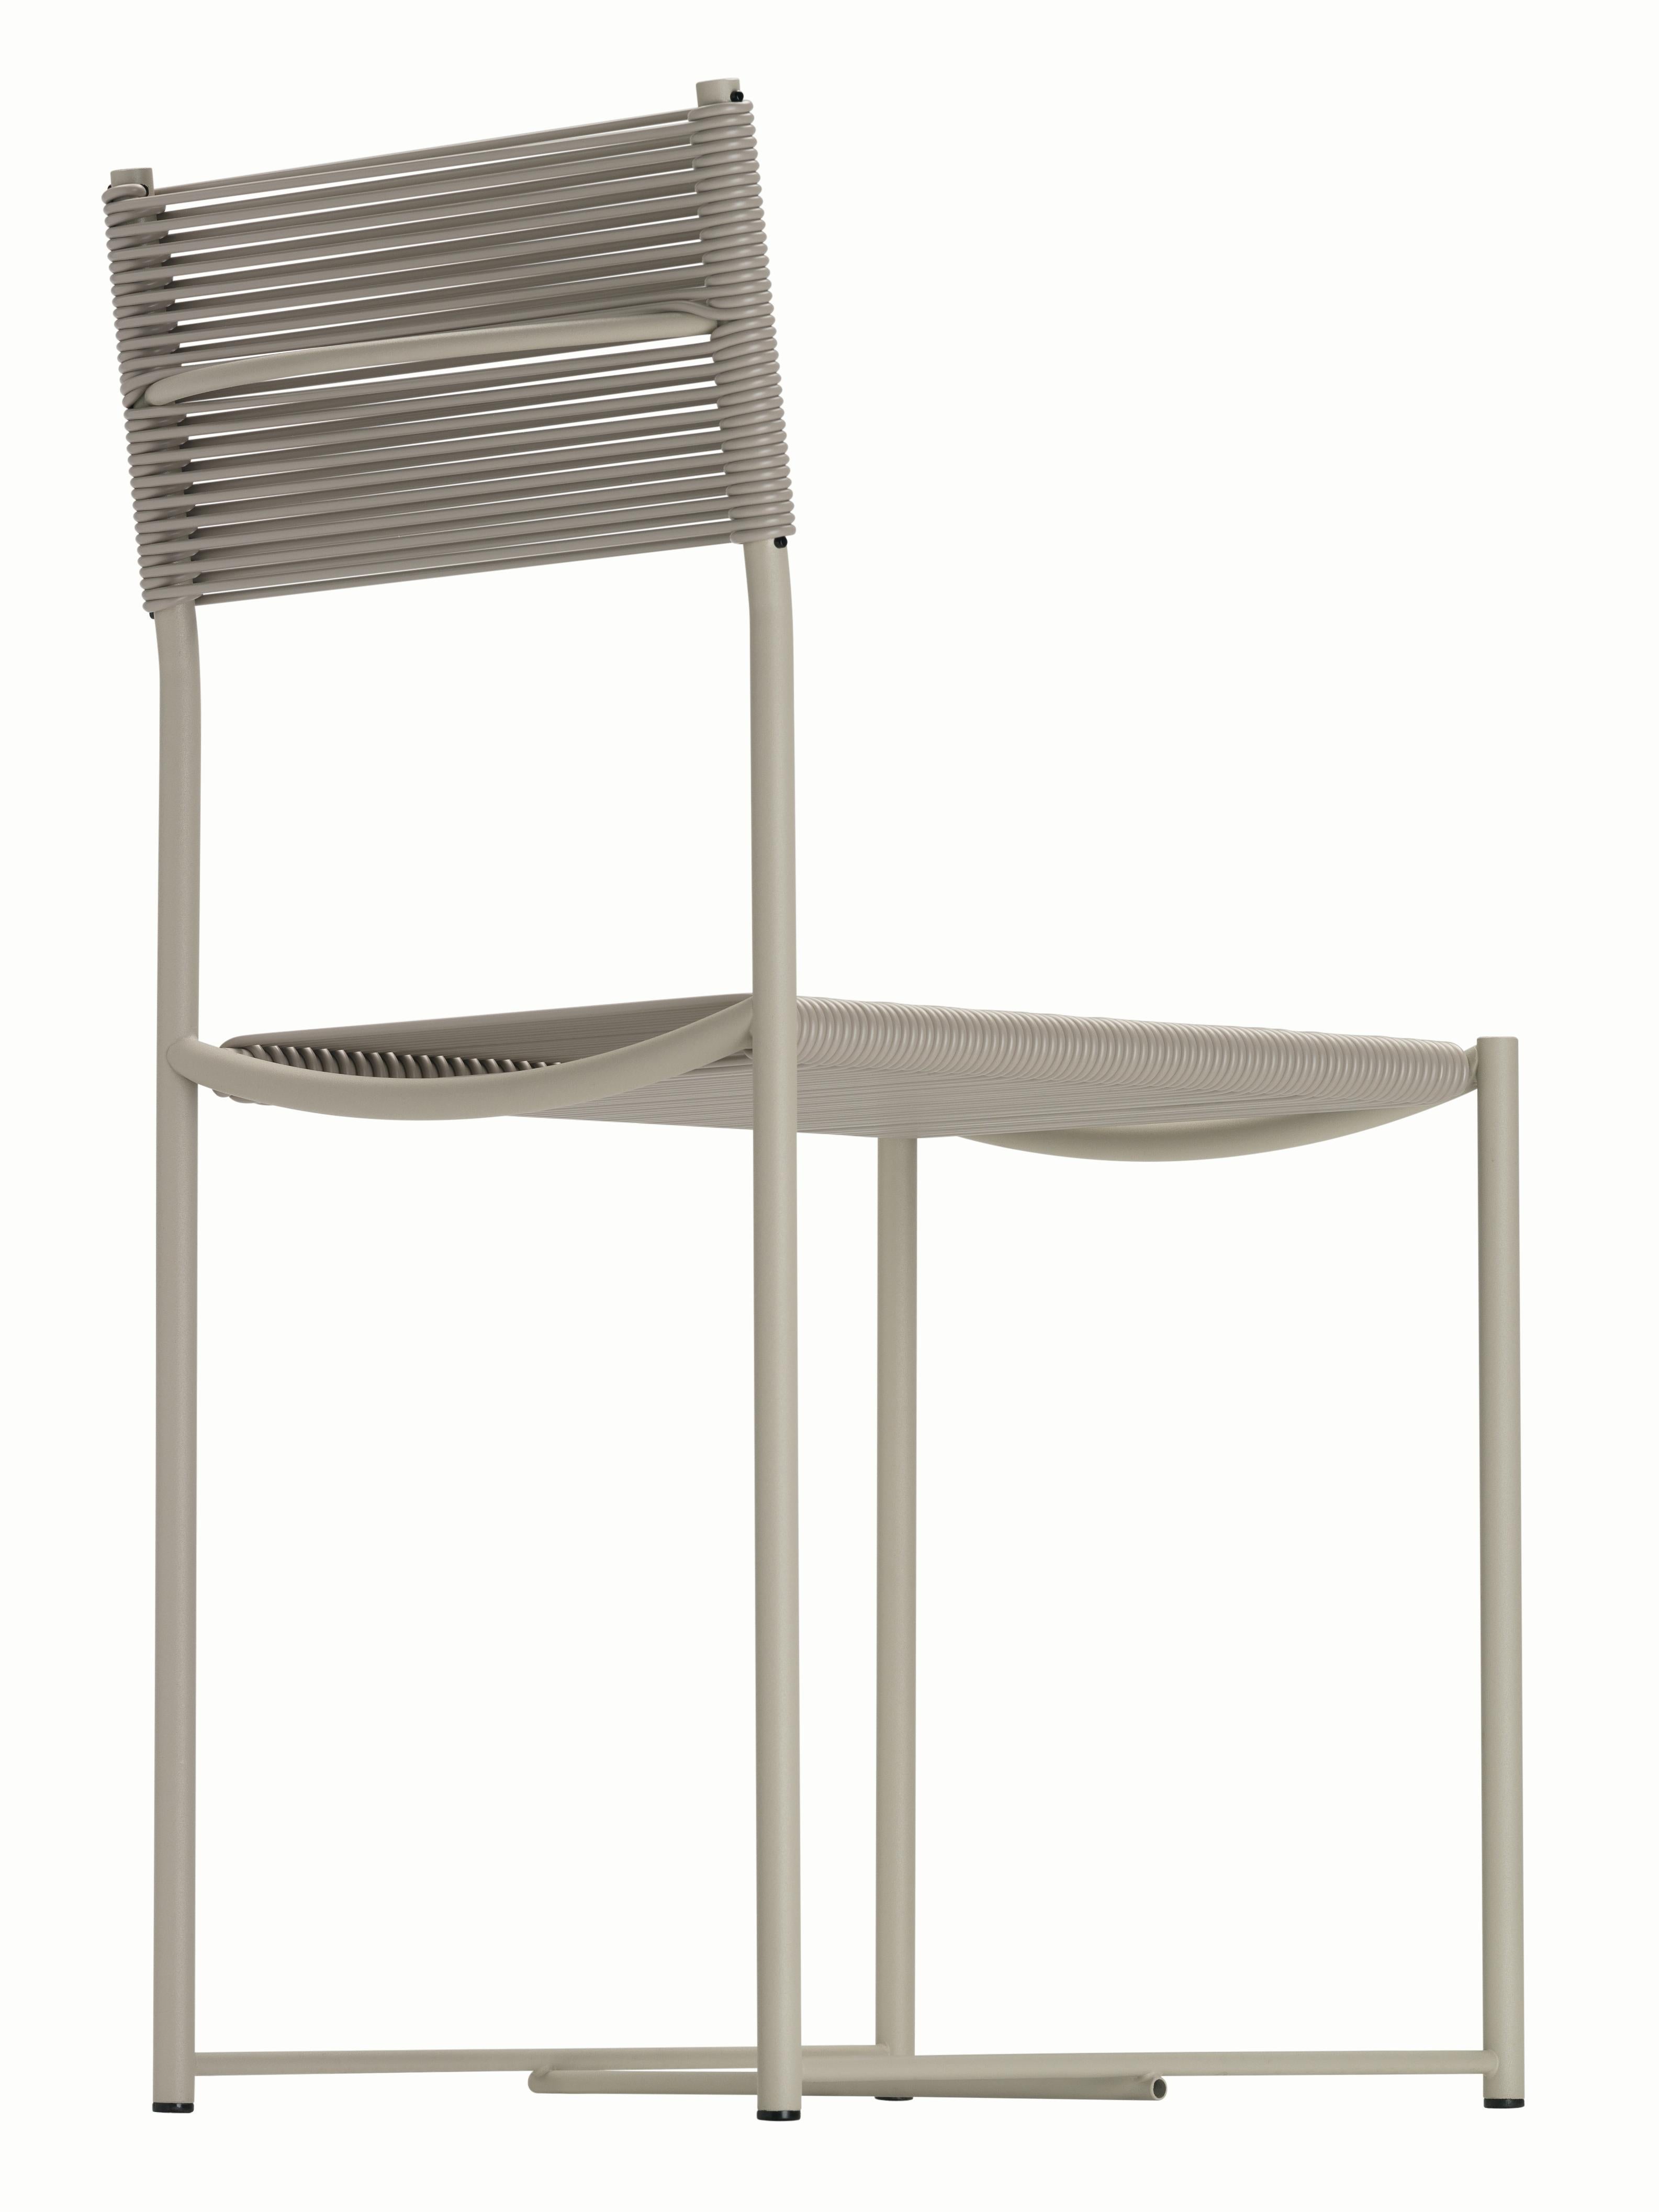 Alias 101 Spaghetti Chair with Beige PVC Seat and Sand Lacquered Steel Frame by Giandomenico Belotti

Chair with structure in chromed or lacquered steel, seat and back in PVC.

(1922-2004) After graduating in architecture from the University of